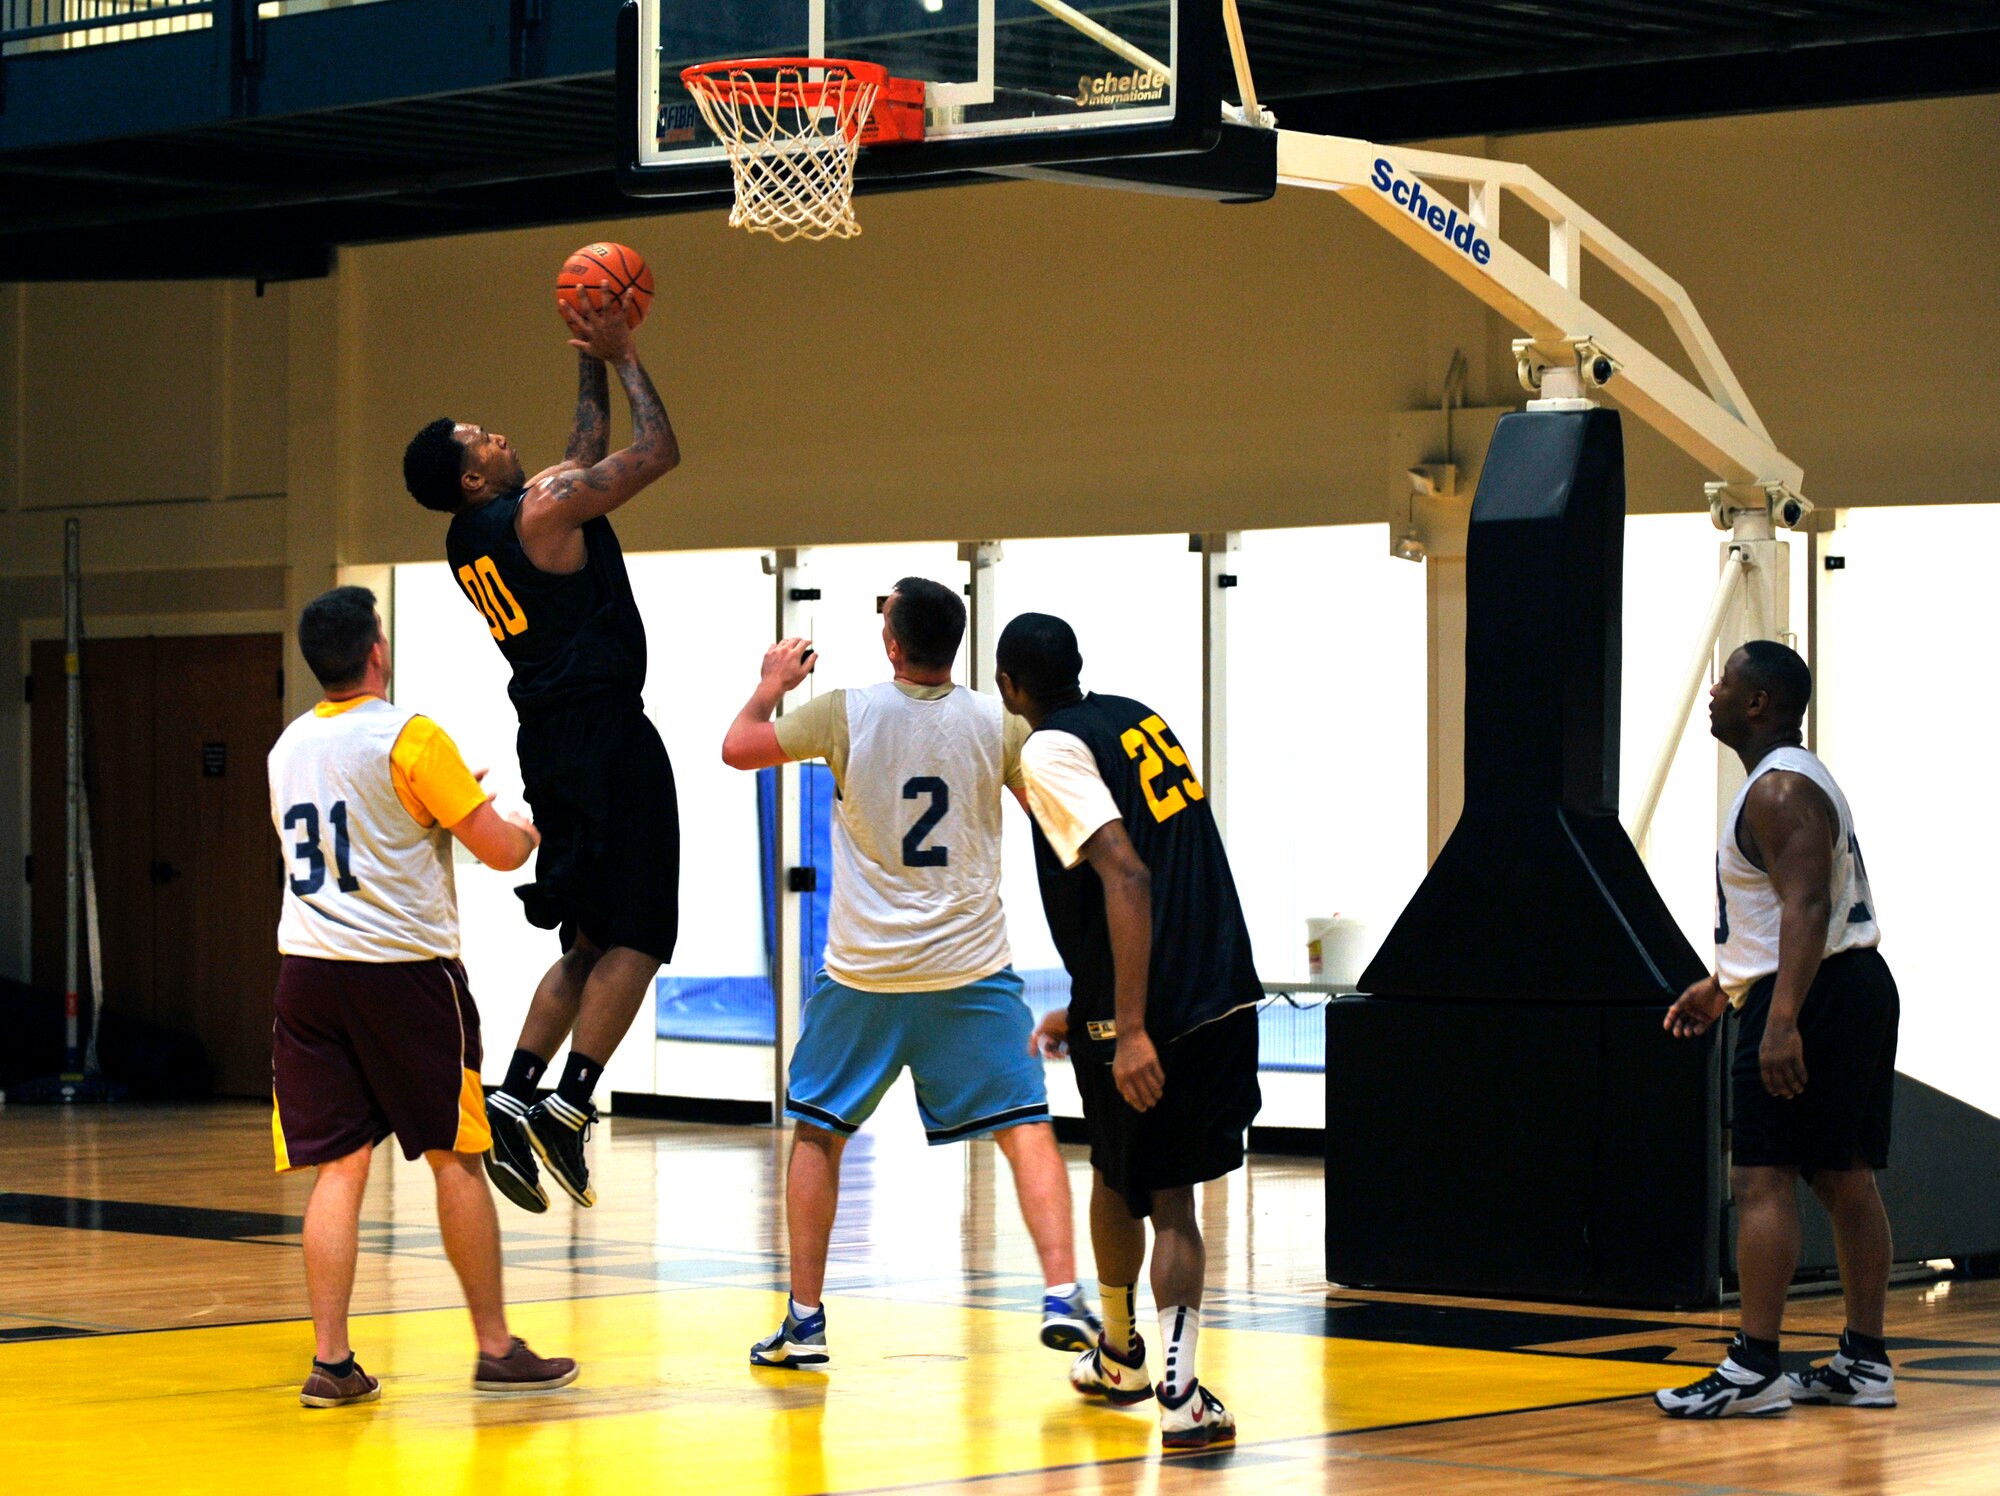 An Army National Guard player attempts to score Jan. 15, 2015, at Little Rock Air Force Base, Ark. The Army National Guard played against the 19th Comptroller/Contracting Squadron. (U.S. Air Force photo by Senior Airman Stephanie Serrano)